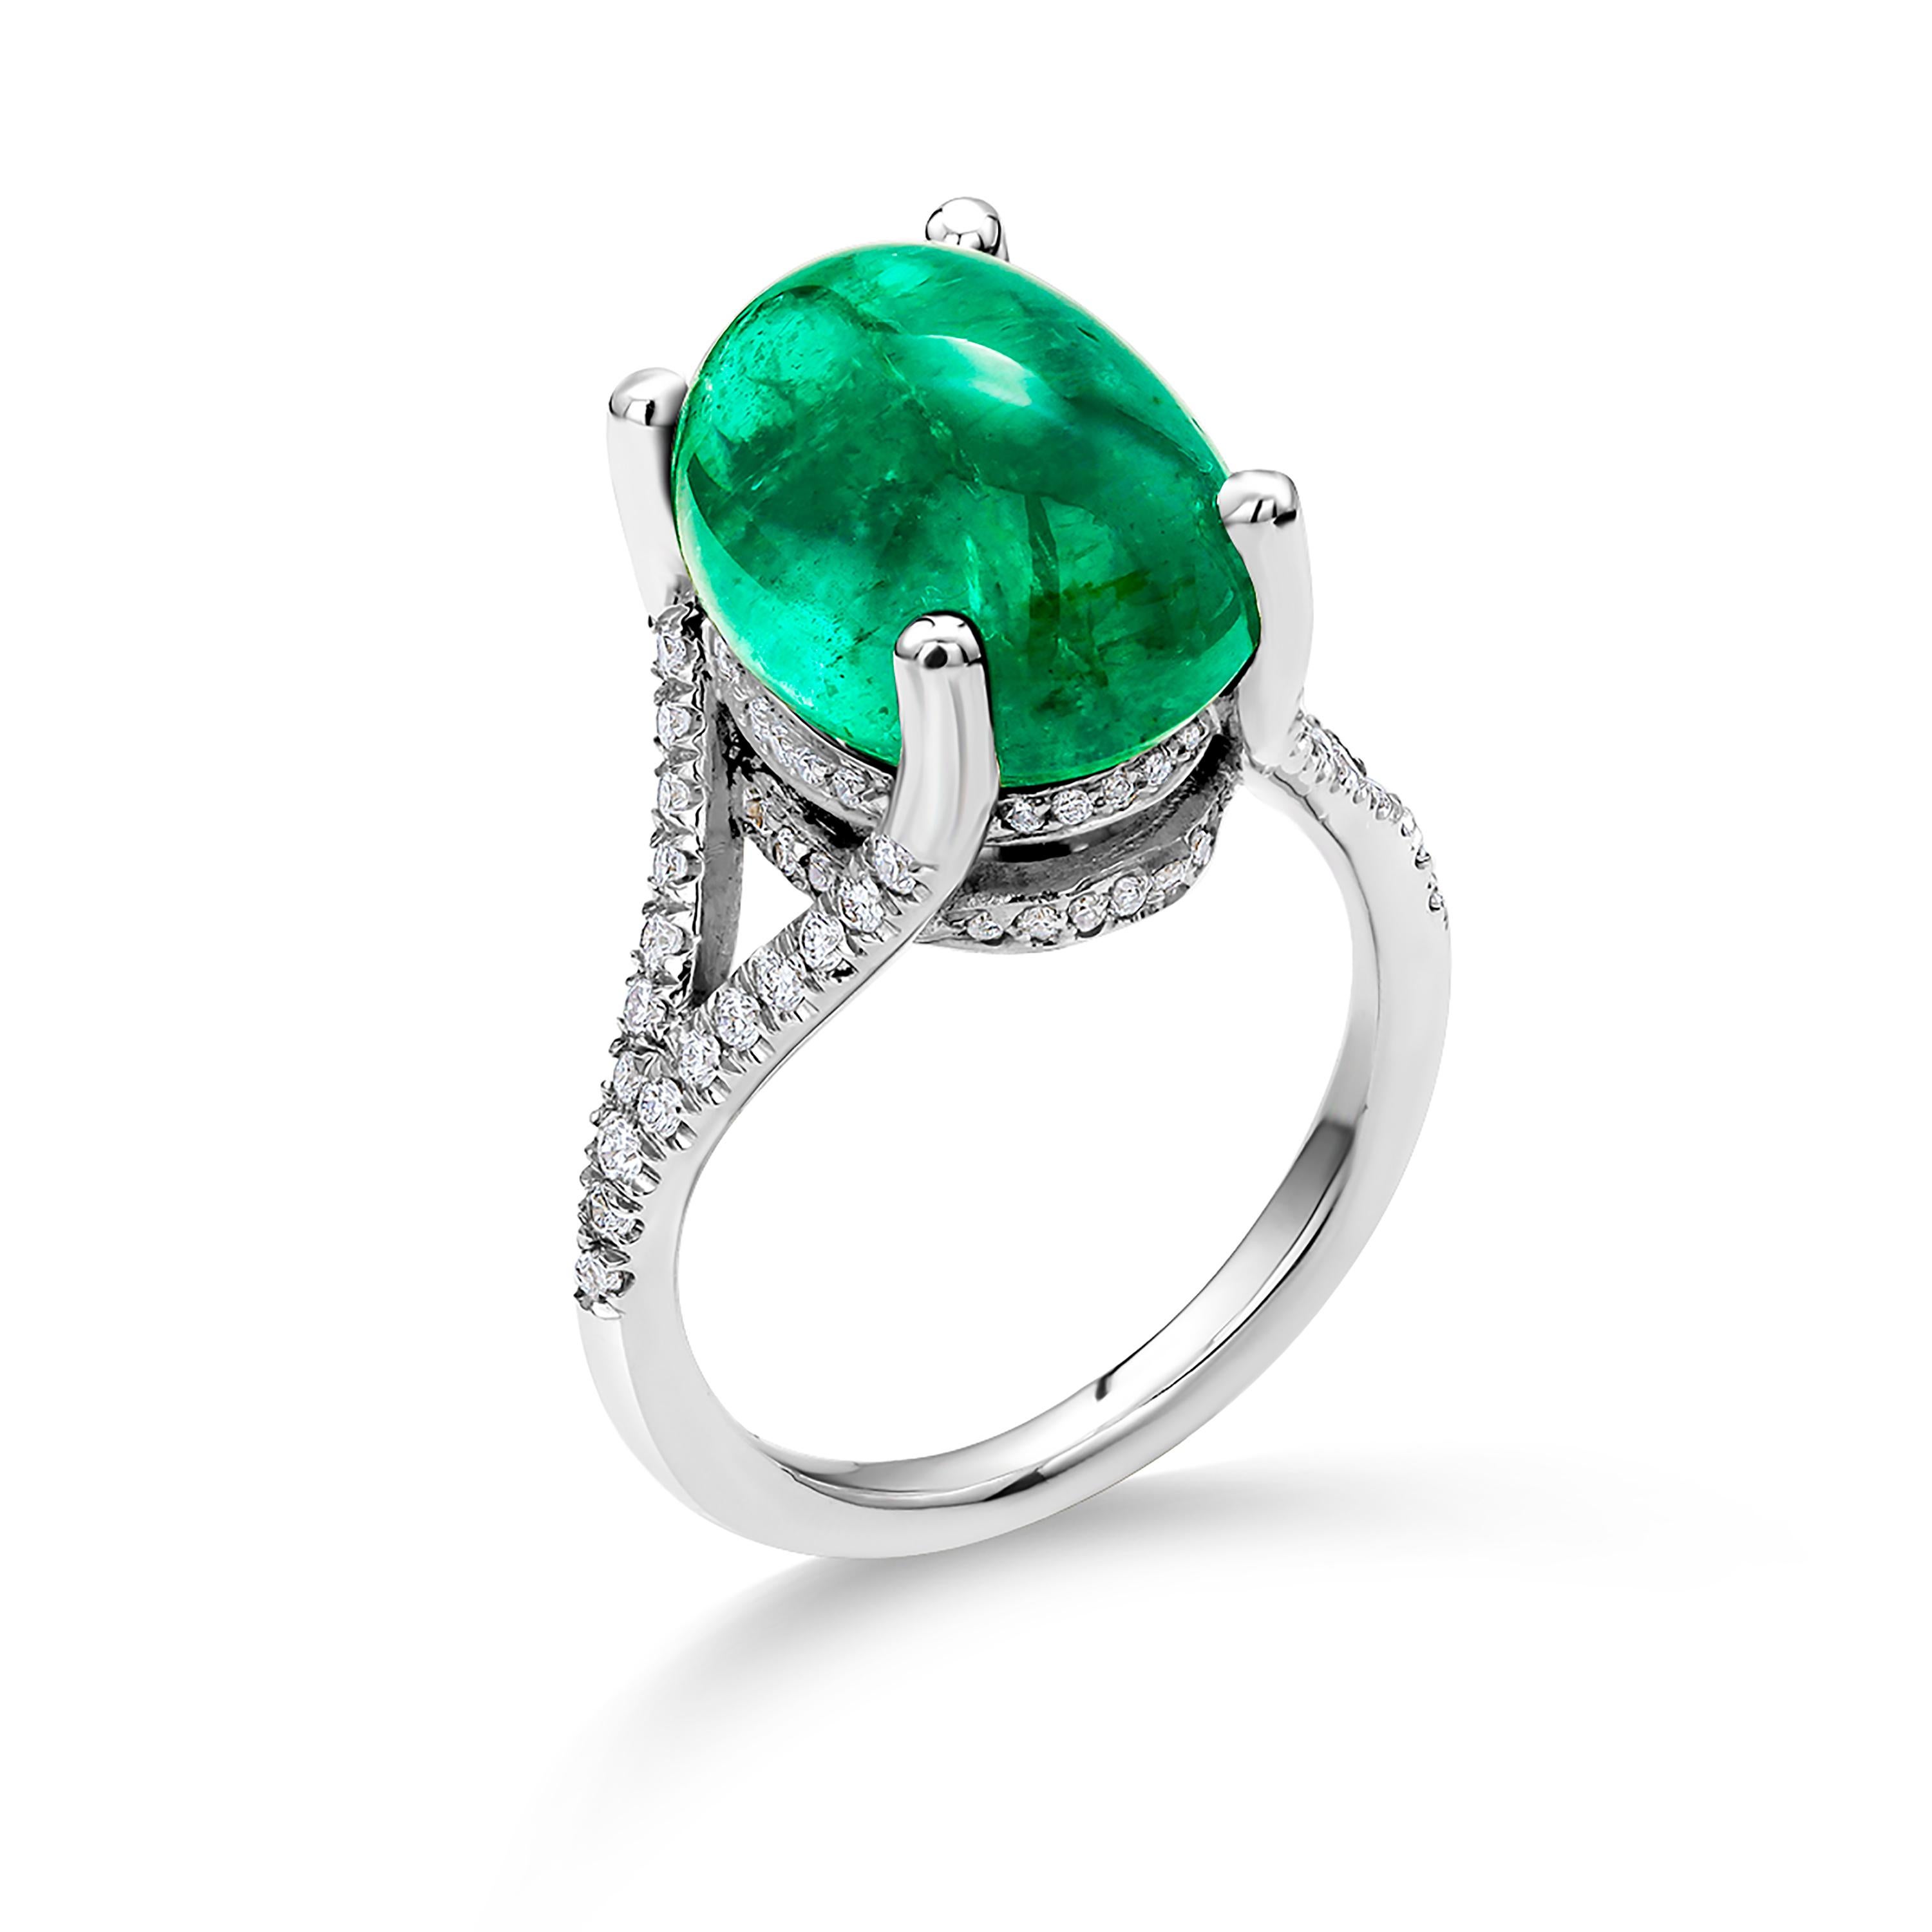 Cabochon Colombia Emerald Diamond Cluster Gold Ring Weighing 11.05 Carat 1